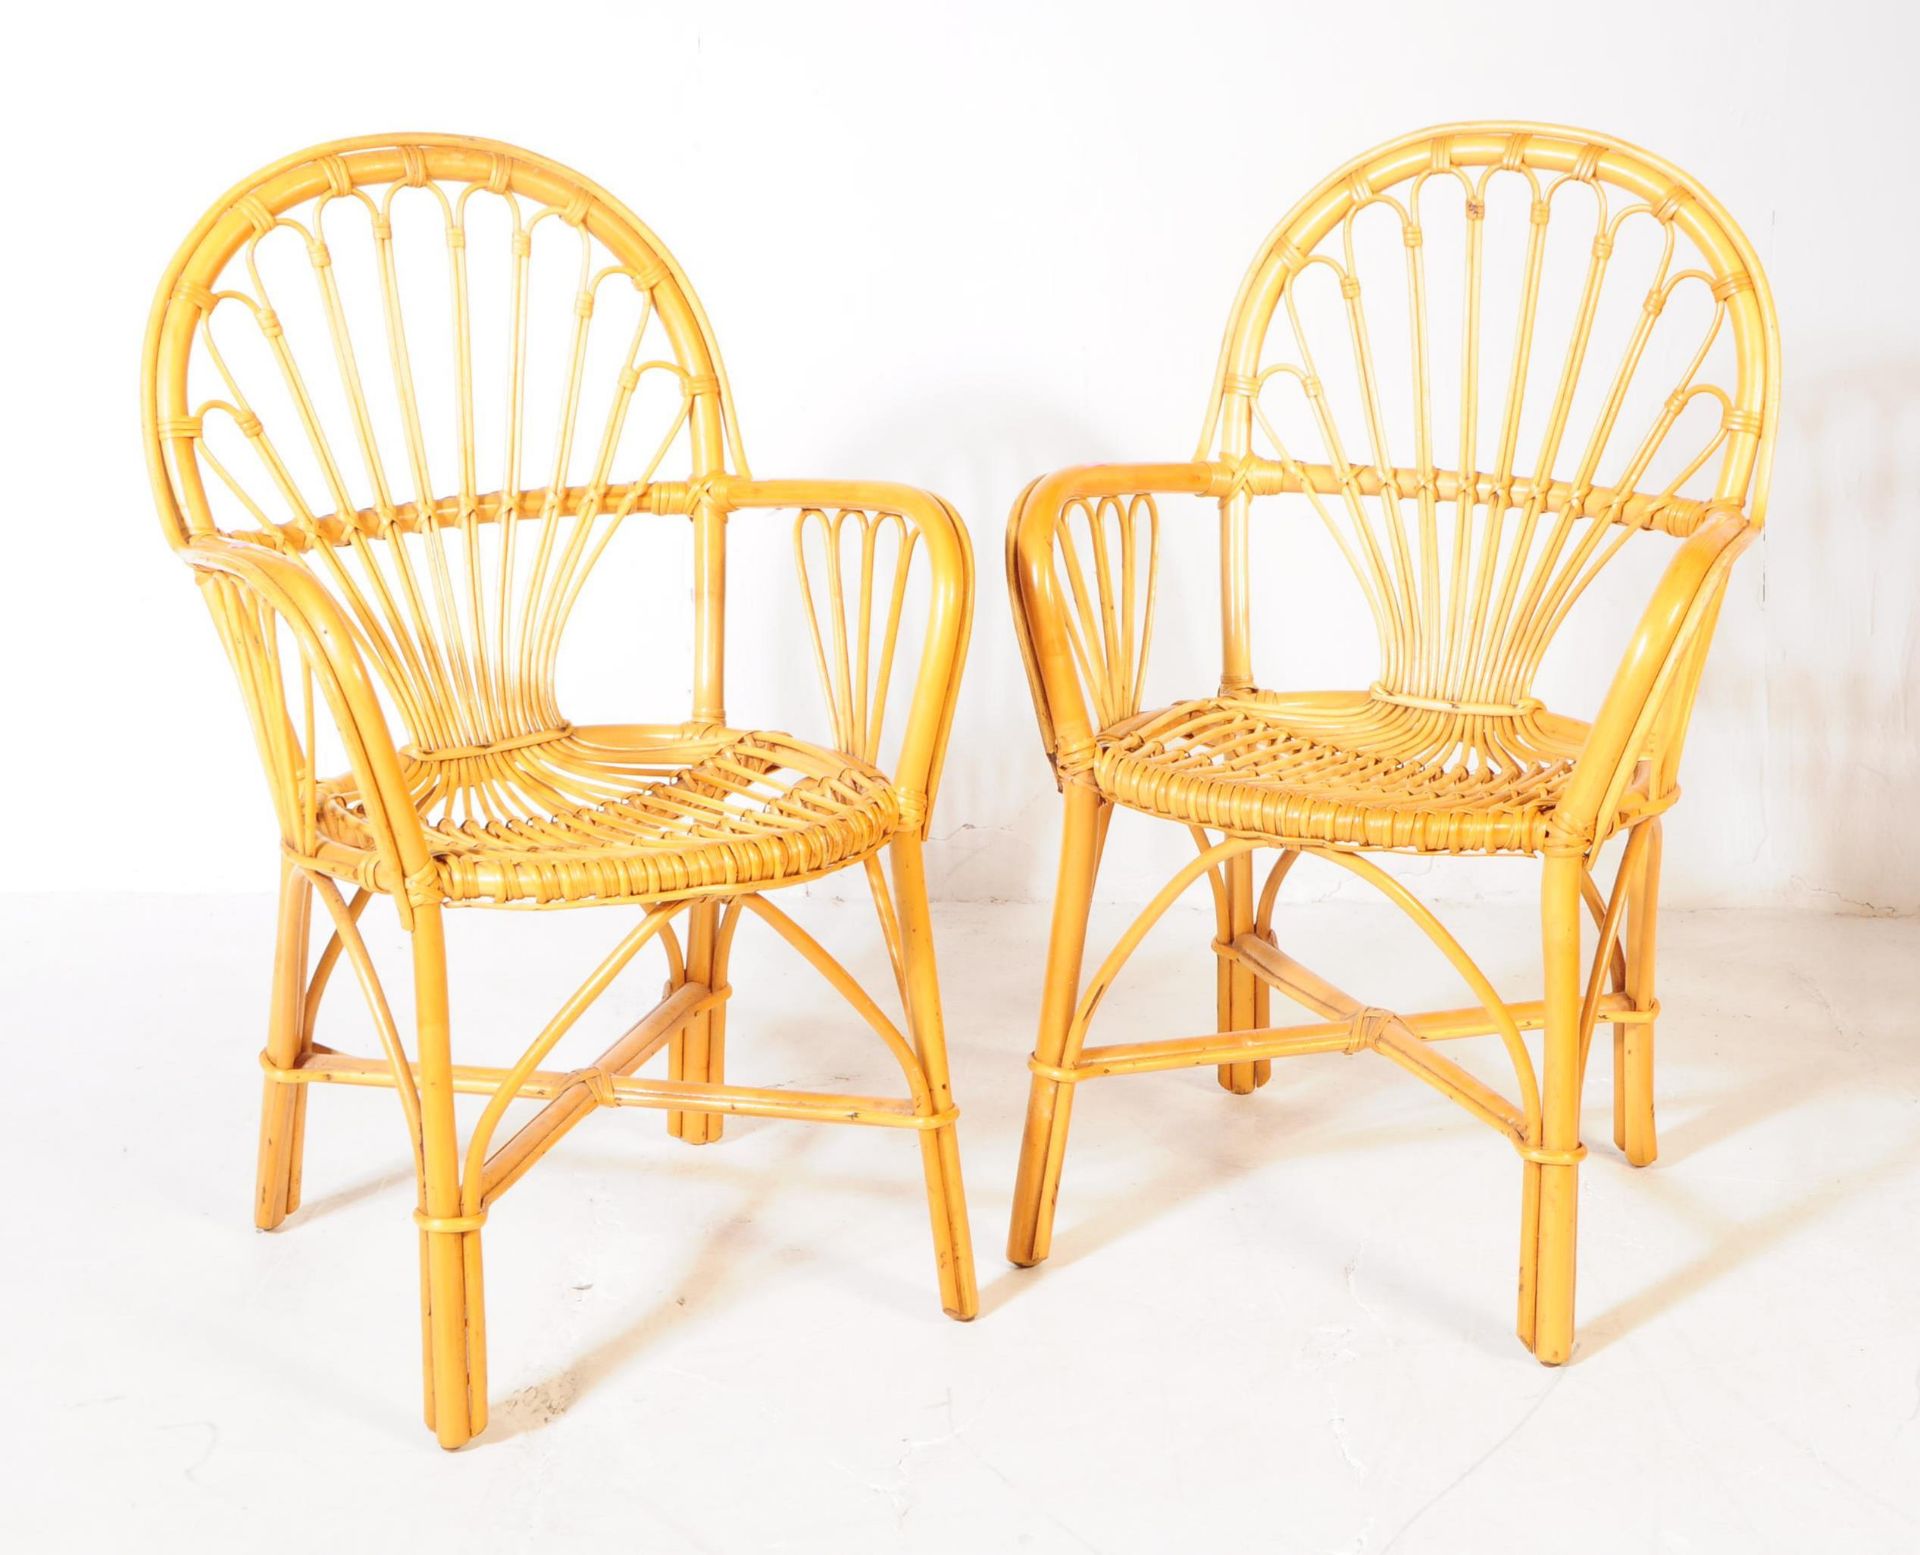 TWO VINTAGE 20TH CENTURY BAMBOO & CANE ARMCHAIRS